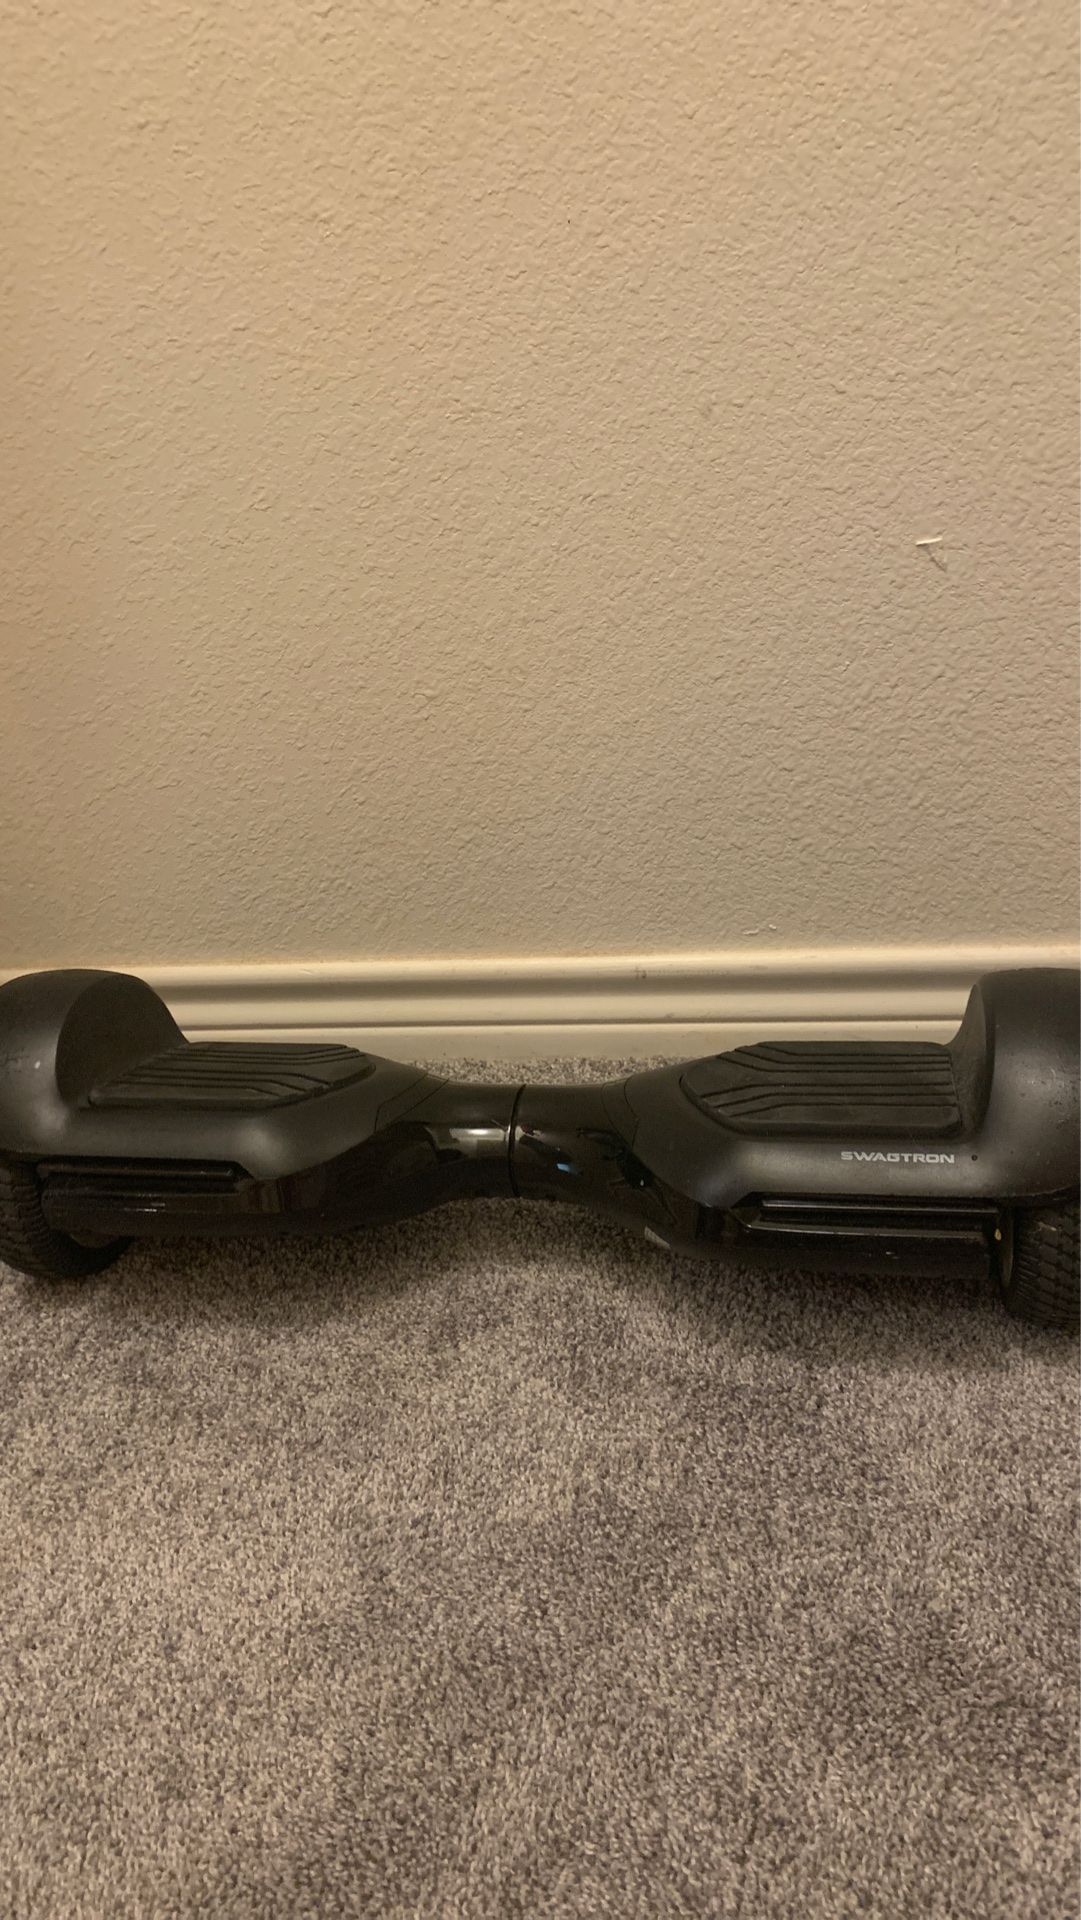 Hoverboard with Bluetooth speaker